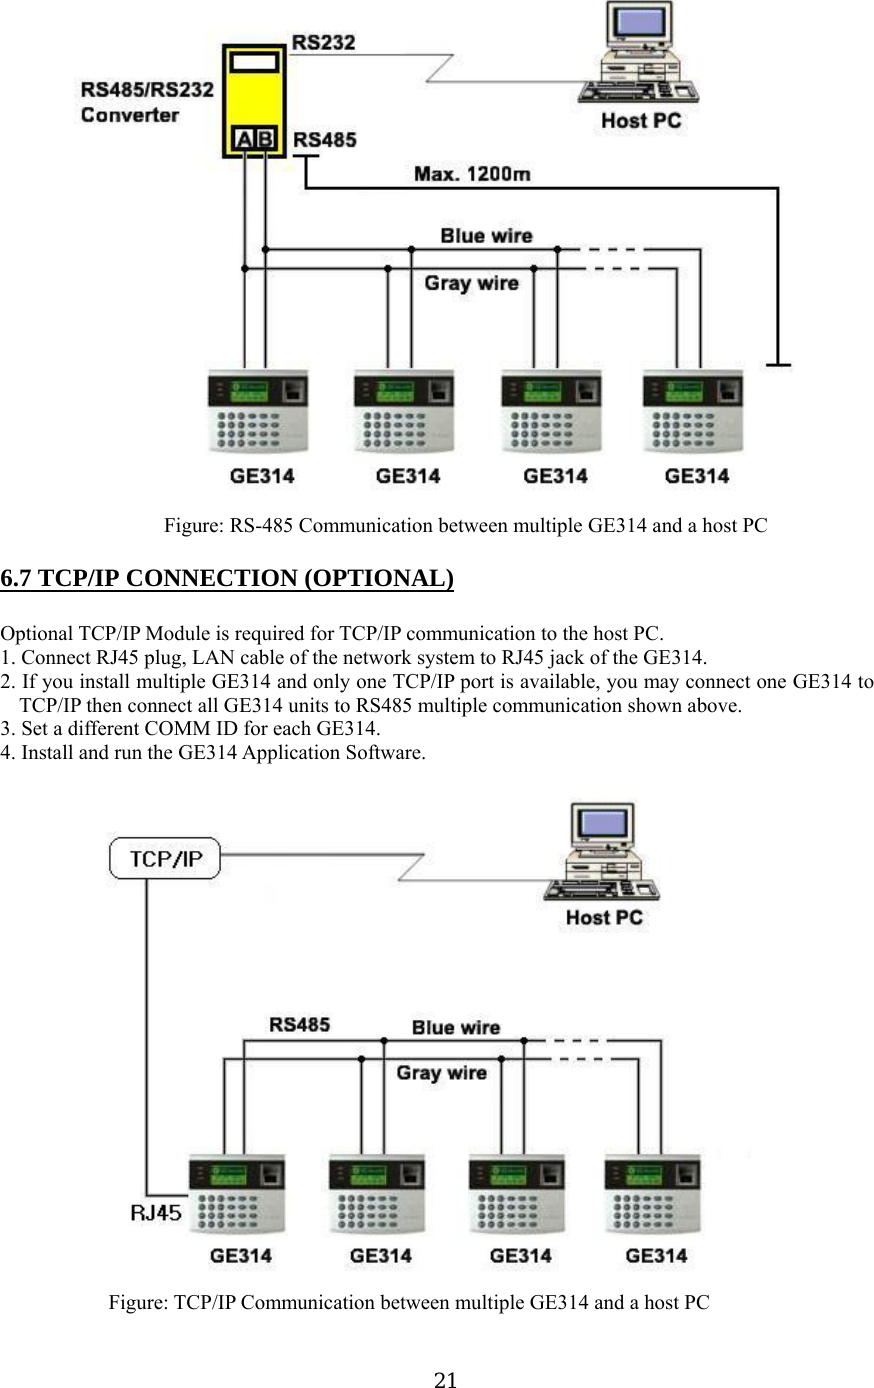  Figure: RS-485 Communication between multiple GE314 and a host PC  6.7 TCP/IP CONNECTION (OPTIONAL)  Optional TCP/IP Module is required for TCP/IP communication to the host PC. 1. Connect RJ45 plug, LAN cable of the network system to RJ45 jack of the GE314. 2. If you install multiple GE314 and only one TCP/IP port is available, you may connect one GE314 to TCP/IP then connect all GE314 units to RS485 multiple communication shown above. 3. Set a different COMM ID for each GE314. 4. Install and run the GE314 Application Software.  Figure: TCP/IP Communication between multiple GE314 and a host PC  21